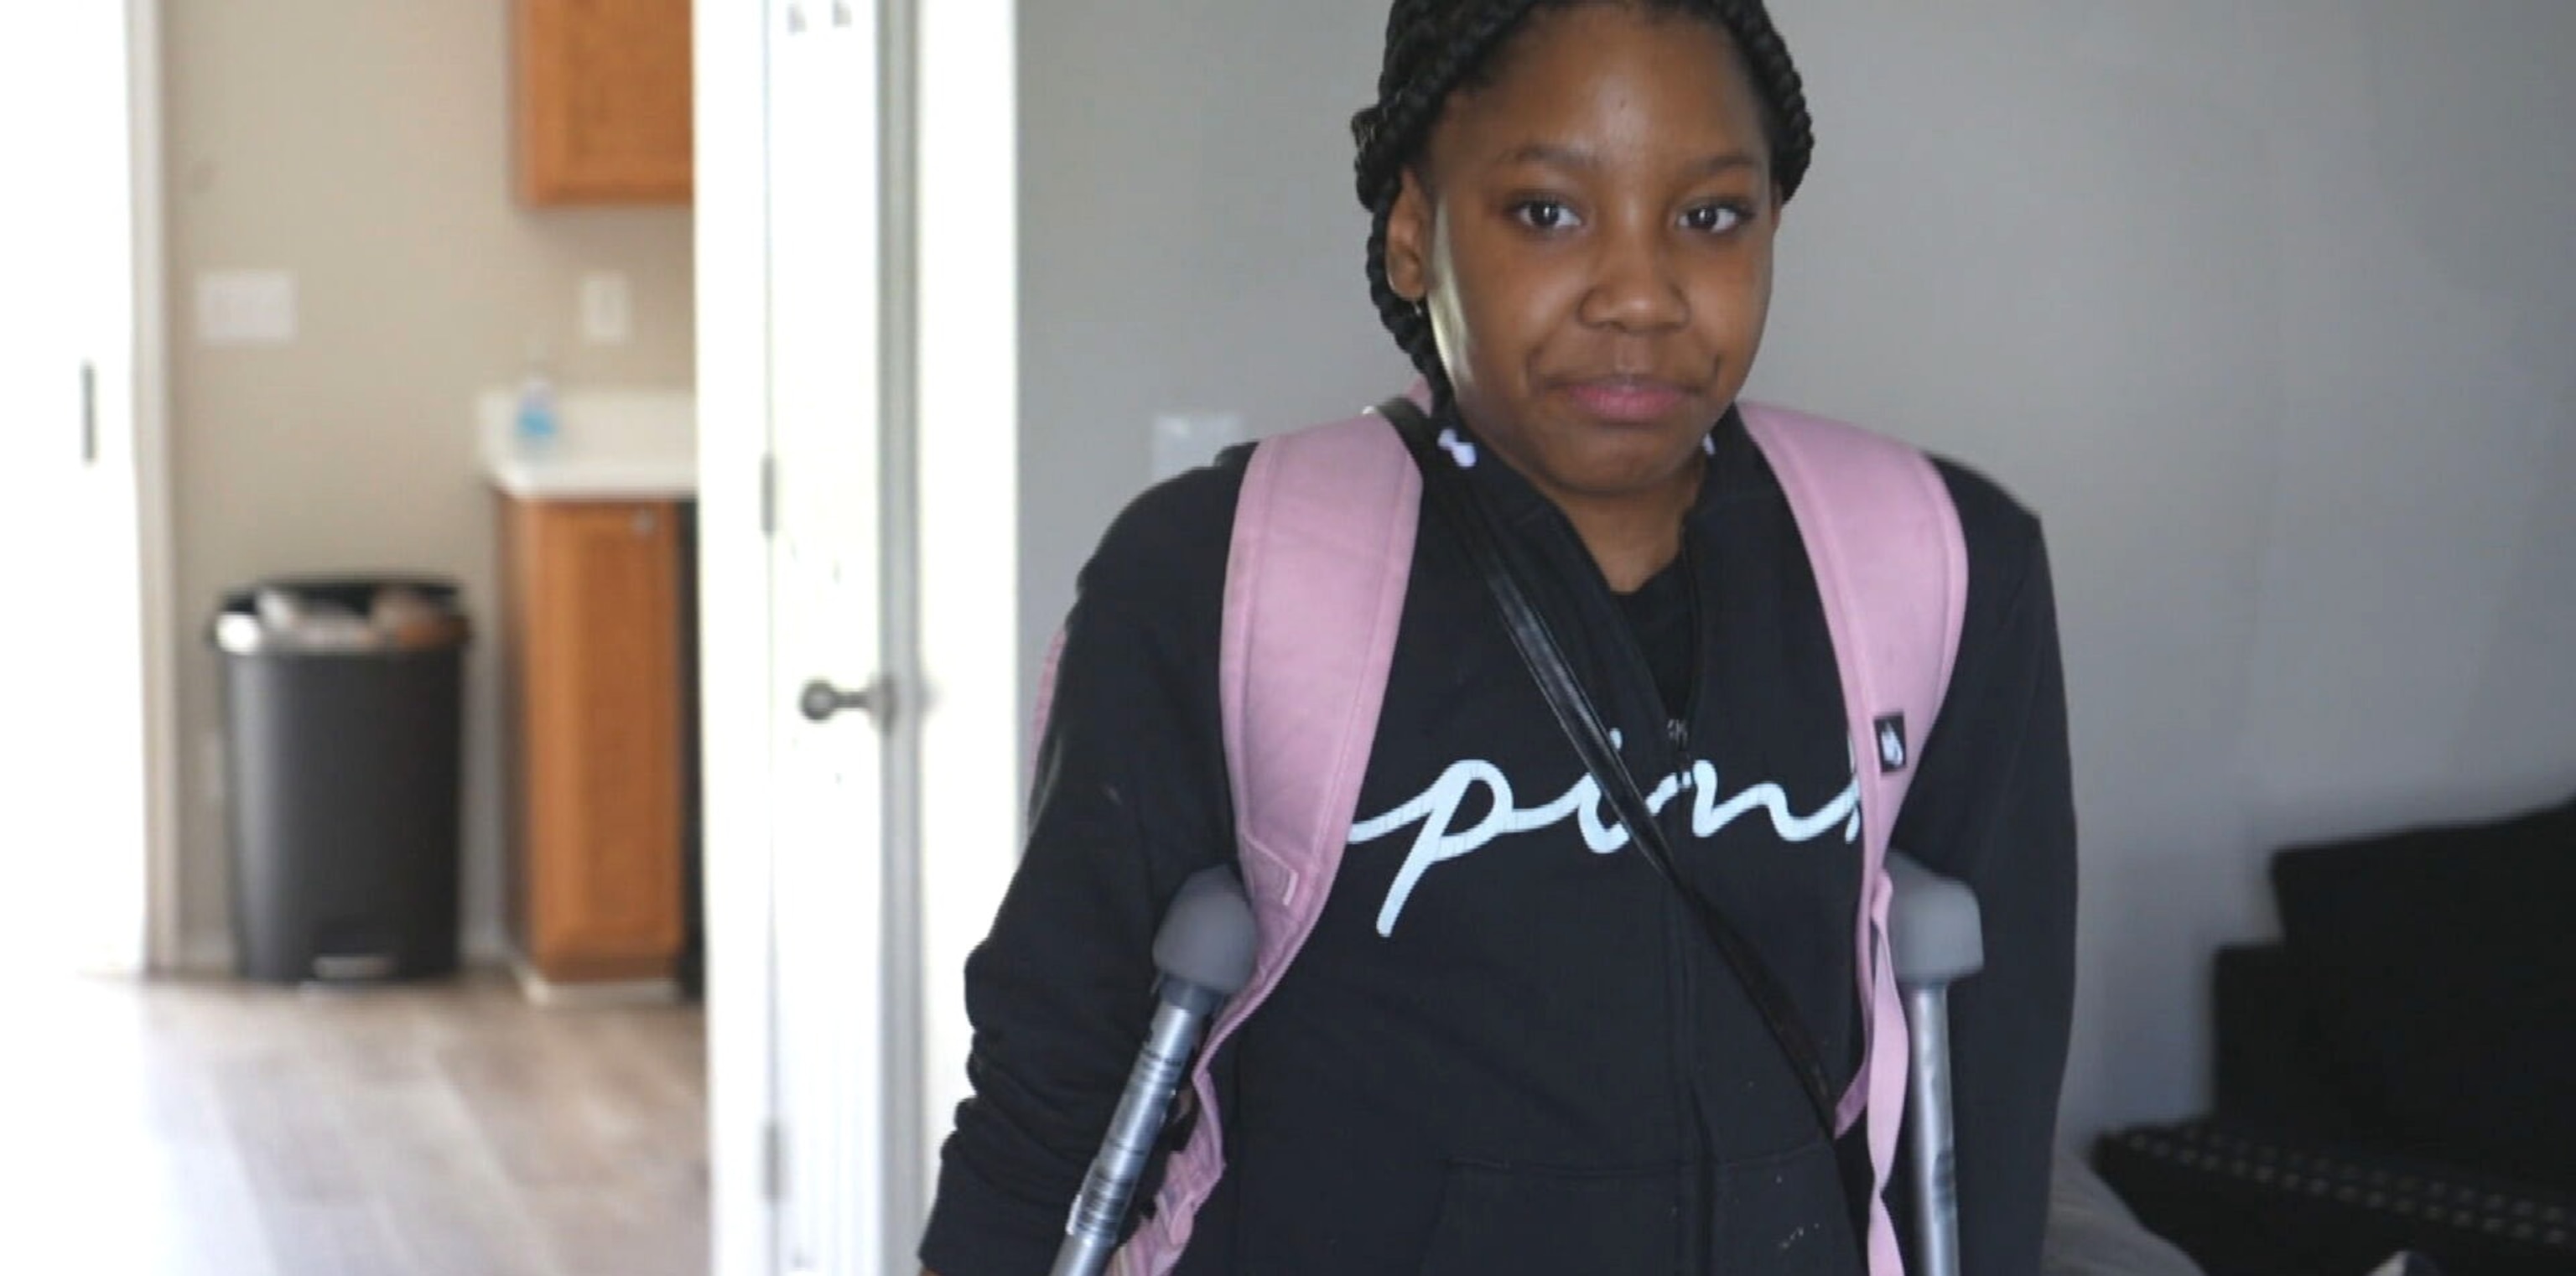 PHOTO: Aalayah Fulmore is still recovering from being shot in her home last year.